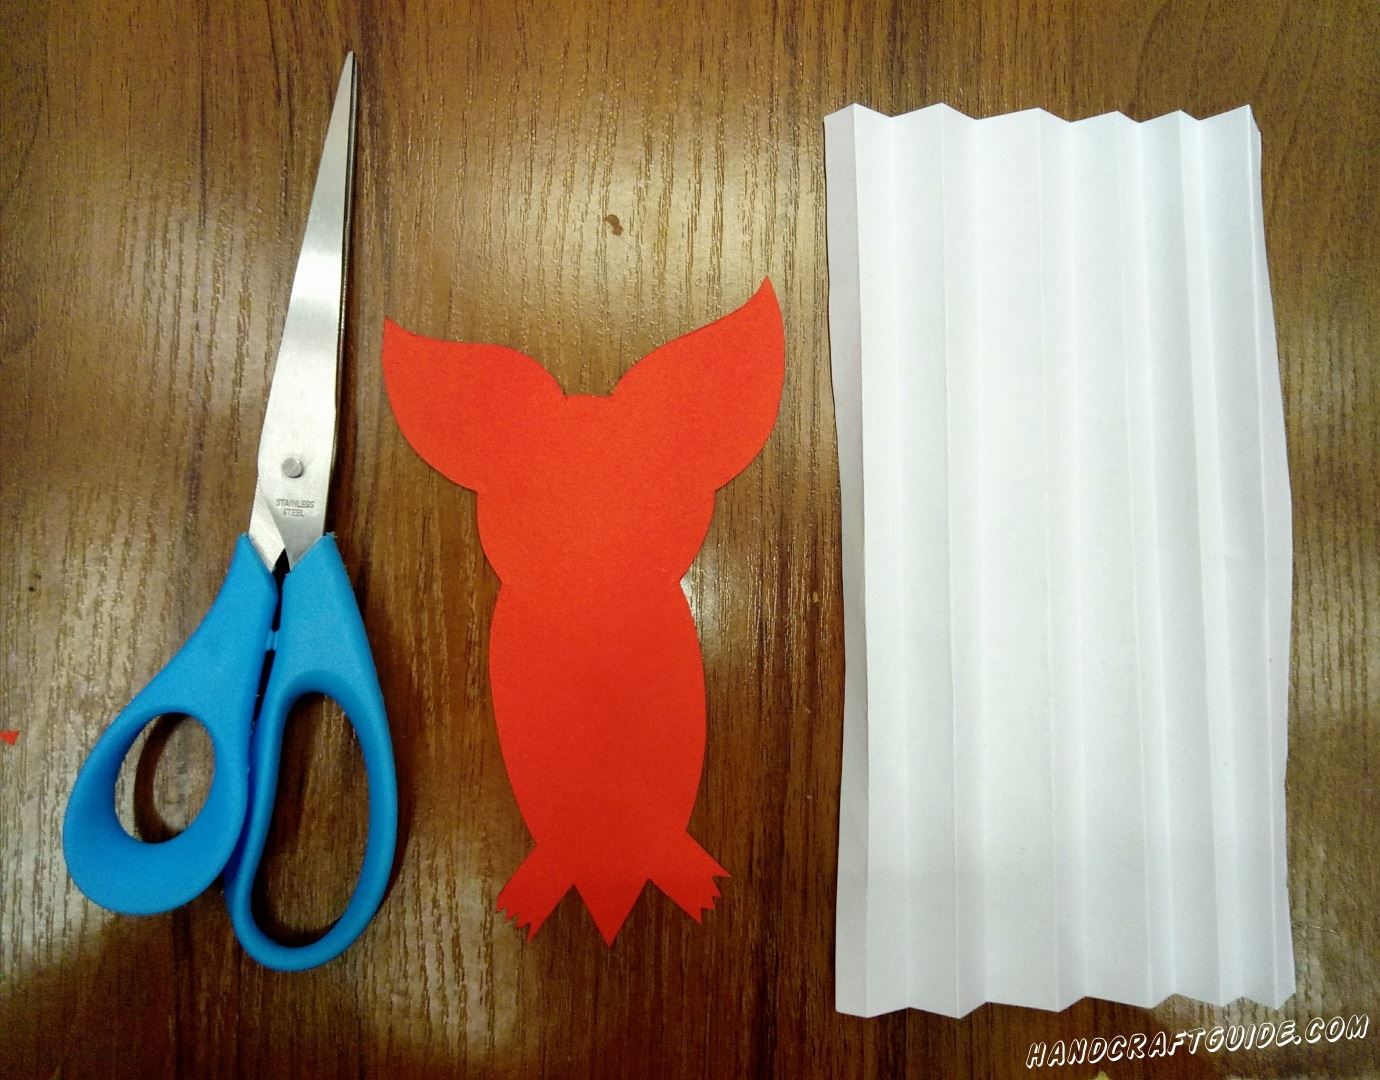 We cut out the body of a bat from colored paper and make a "harmonica" from white paper.